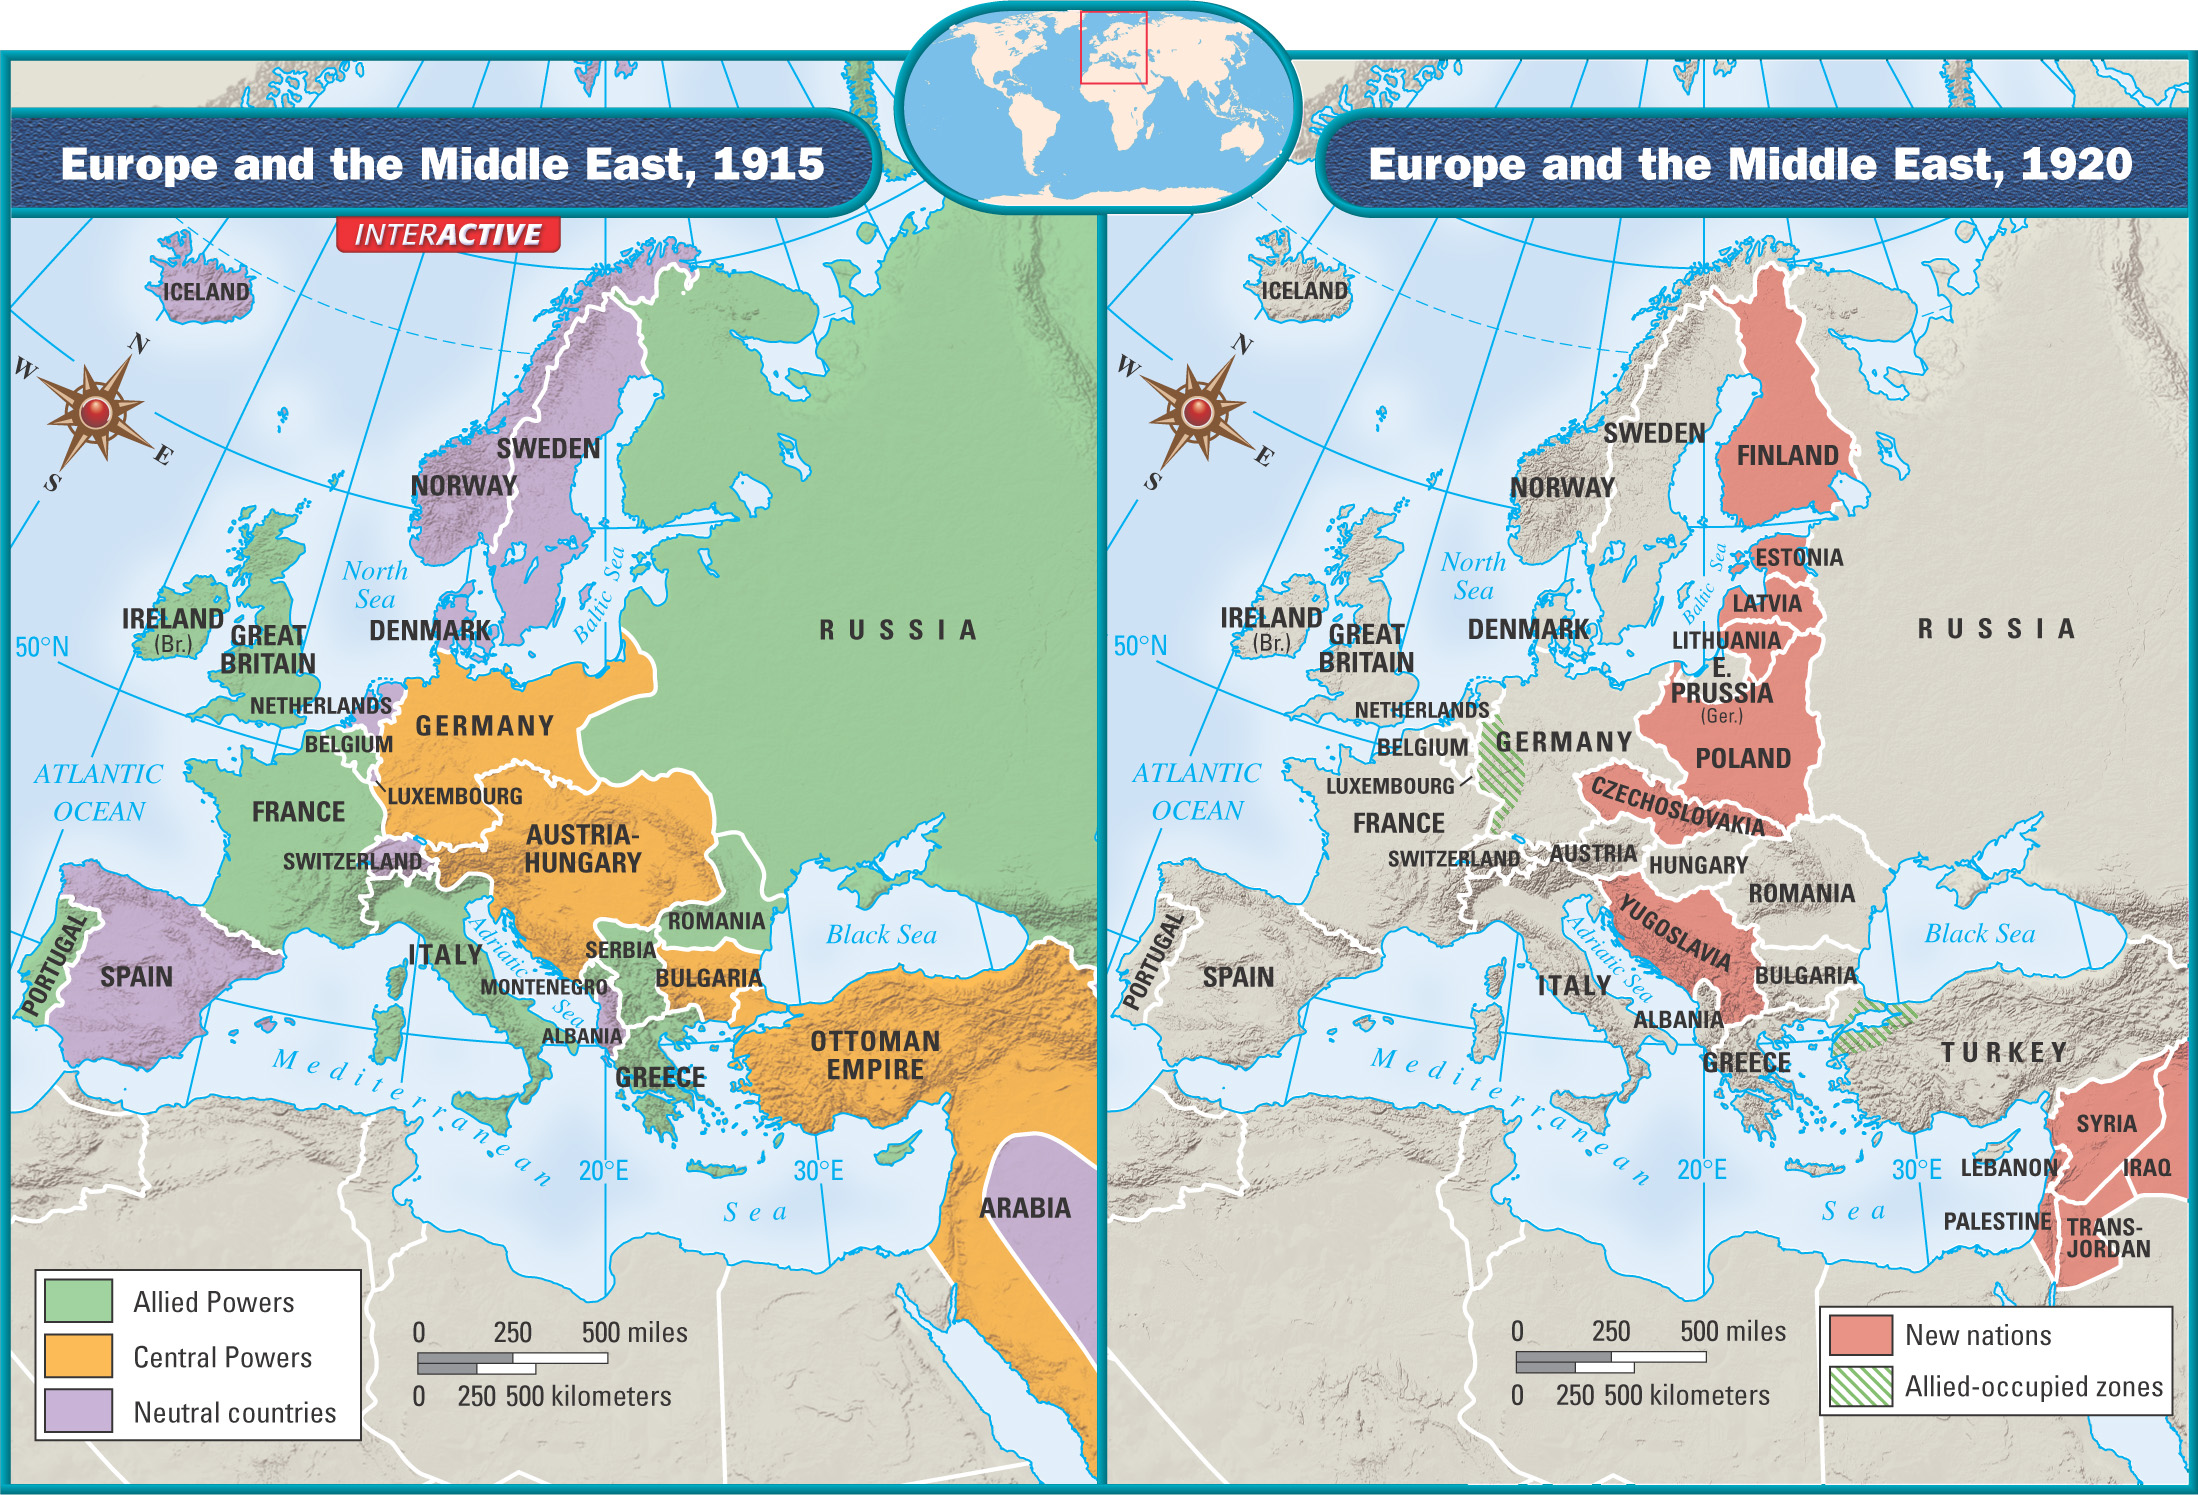 2 maps: Europe and the Middle East in 1915 and 1920